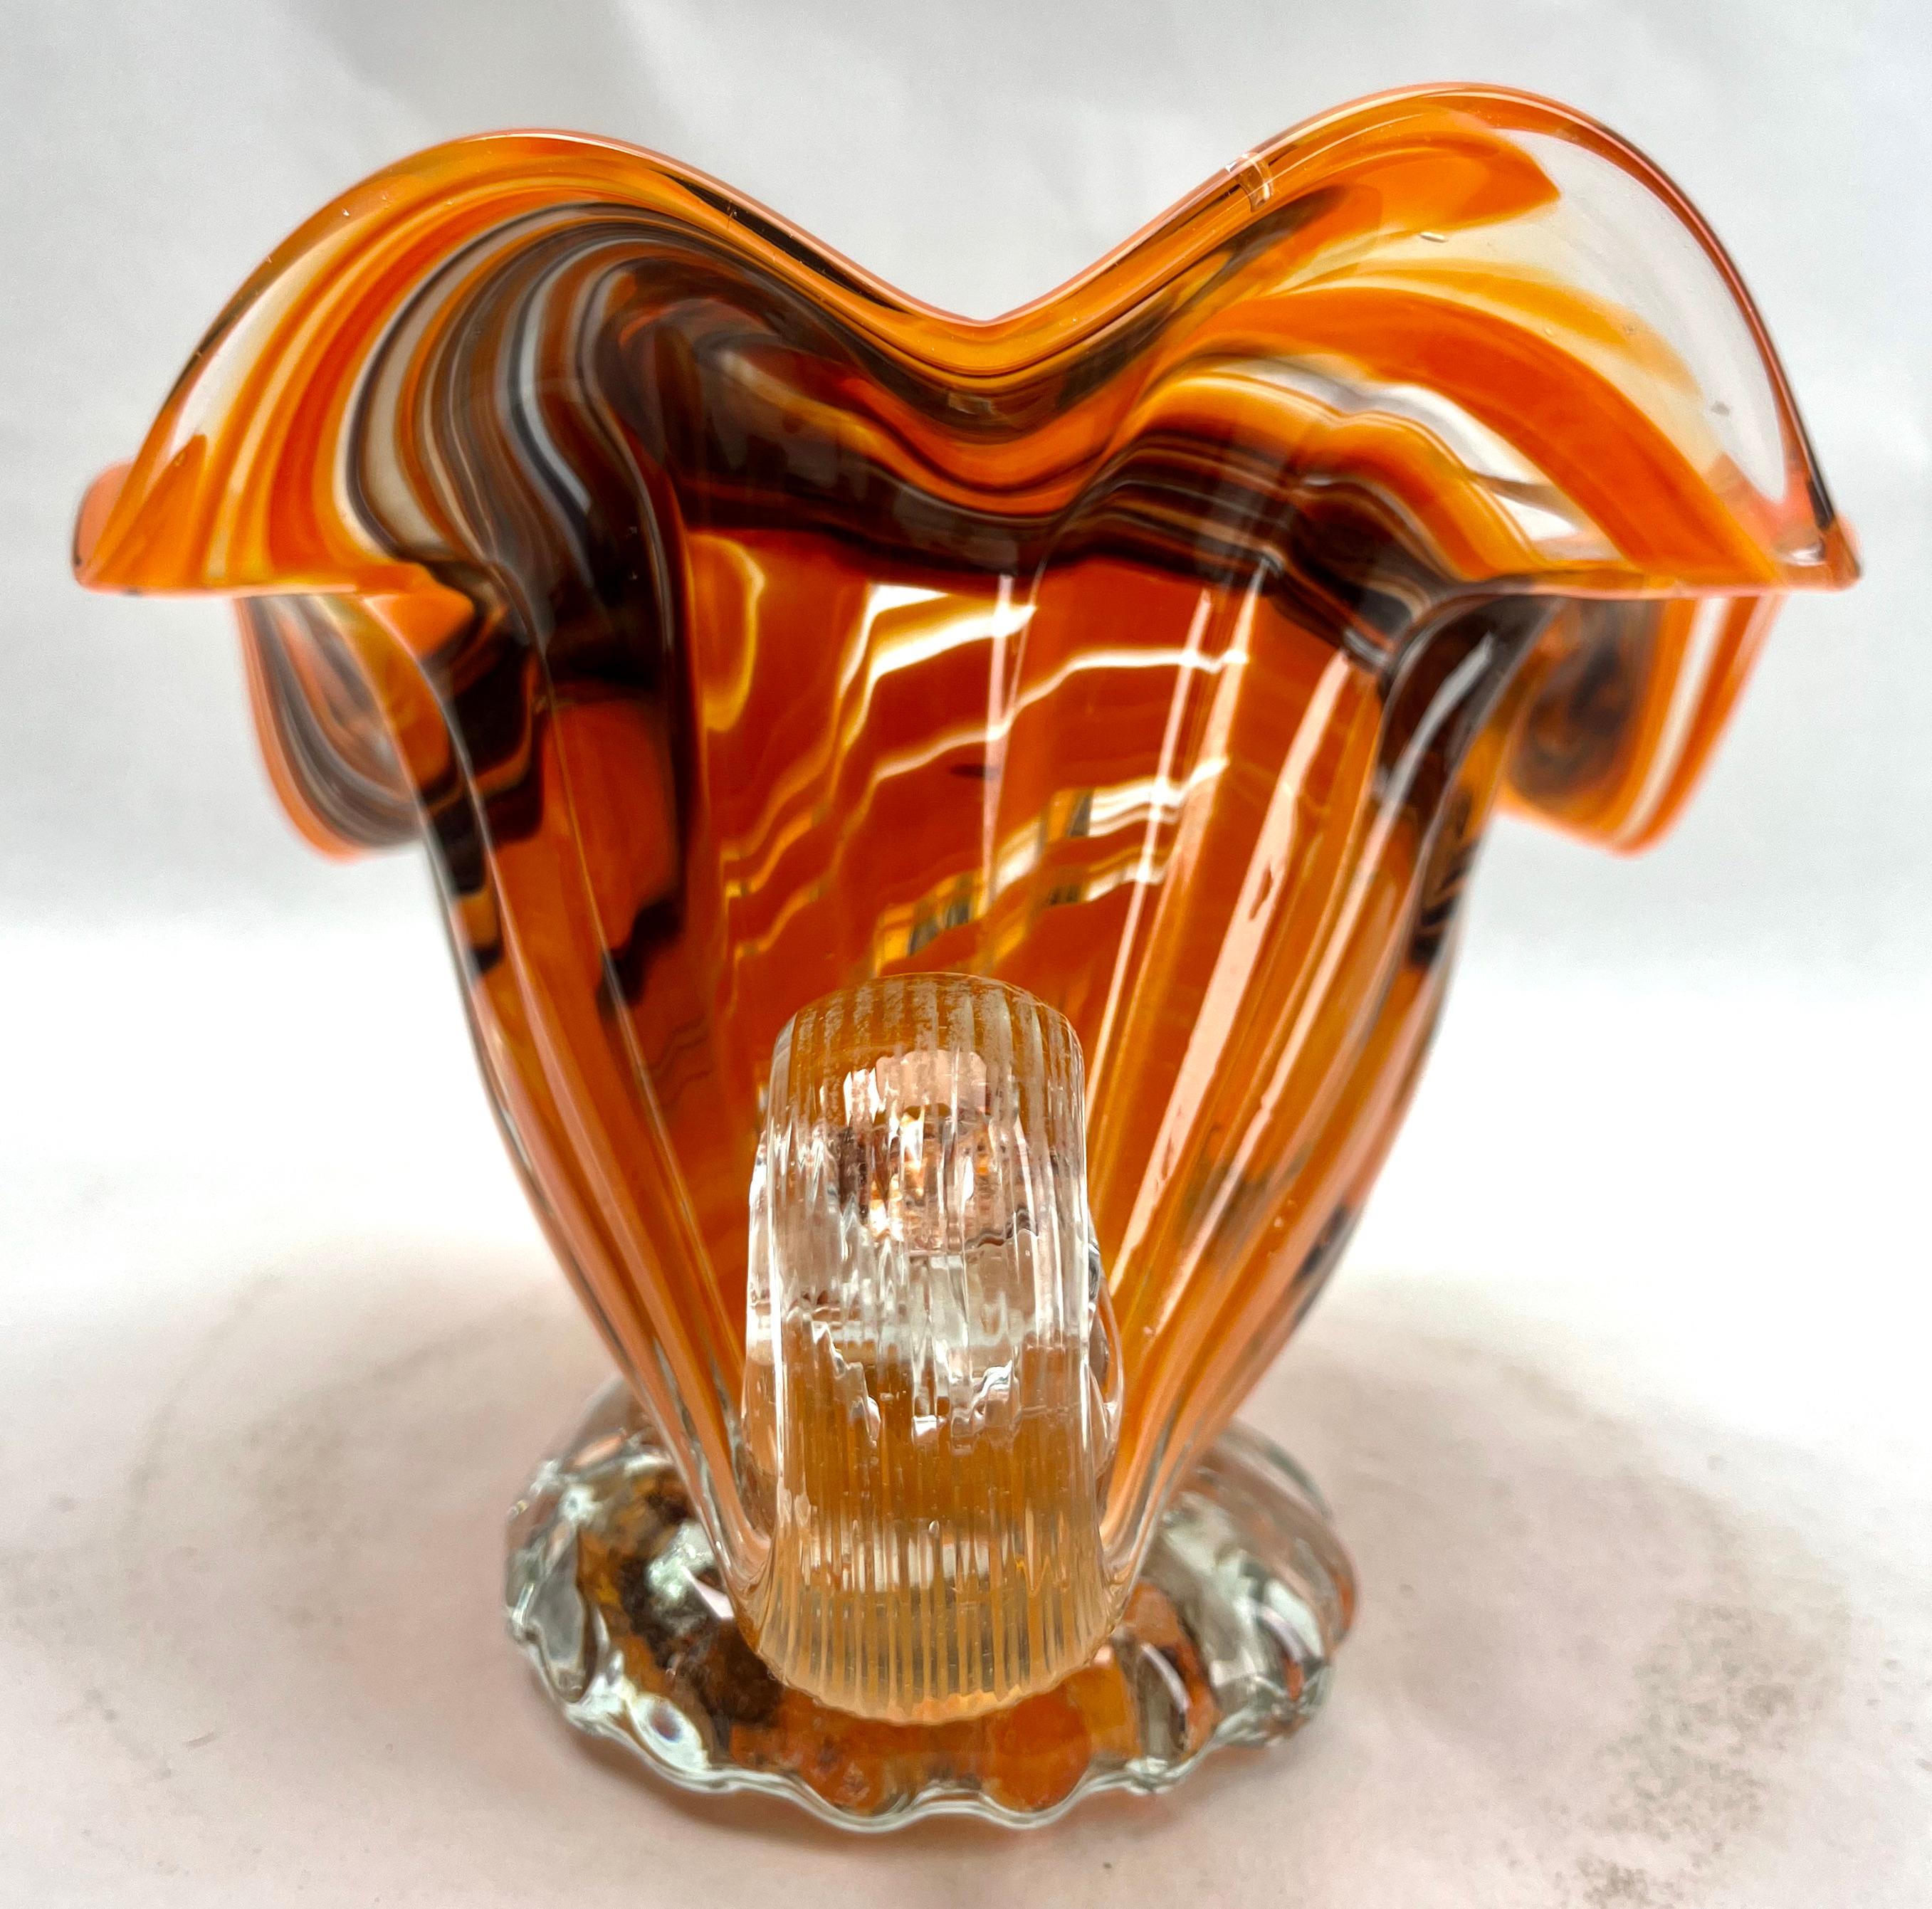 A stunning piece of art! The shape and the colour are fantastic. 
Handblown glass. 
Excellent condition. 
Elegant large Murano handblown pink opalescent art glass cornucopia flower basket.
In style of Archimede Seguso

This biomorphic Murano glass